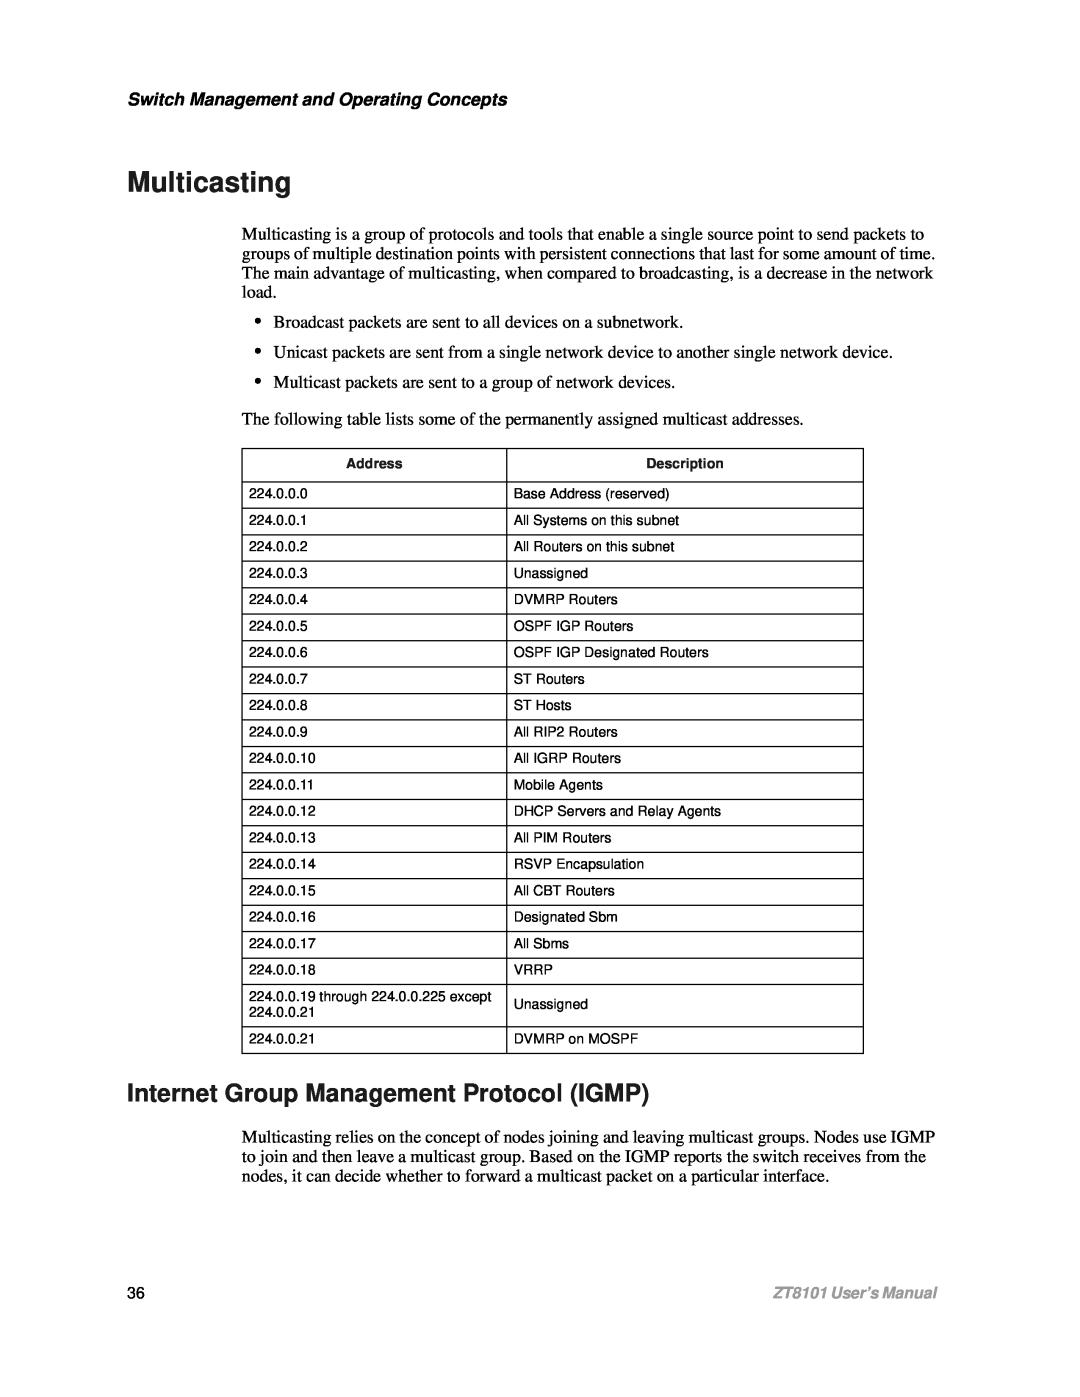 Intel ZT8101 user manual Multicasting, Internet Group Management Protocol IGMP, Switch Management and Operating Concepts 